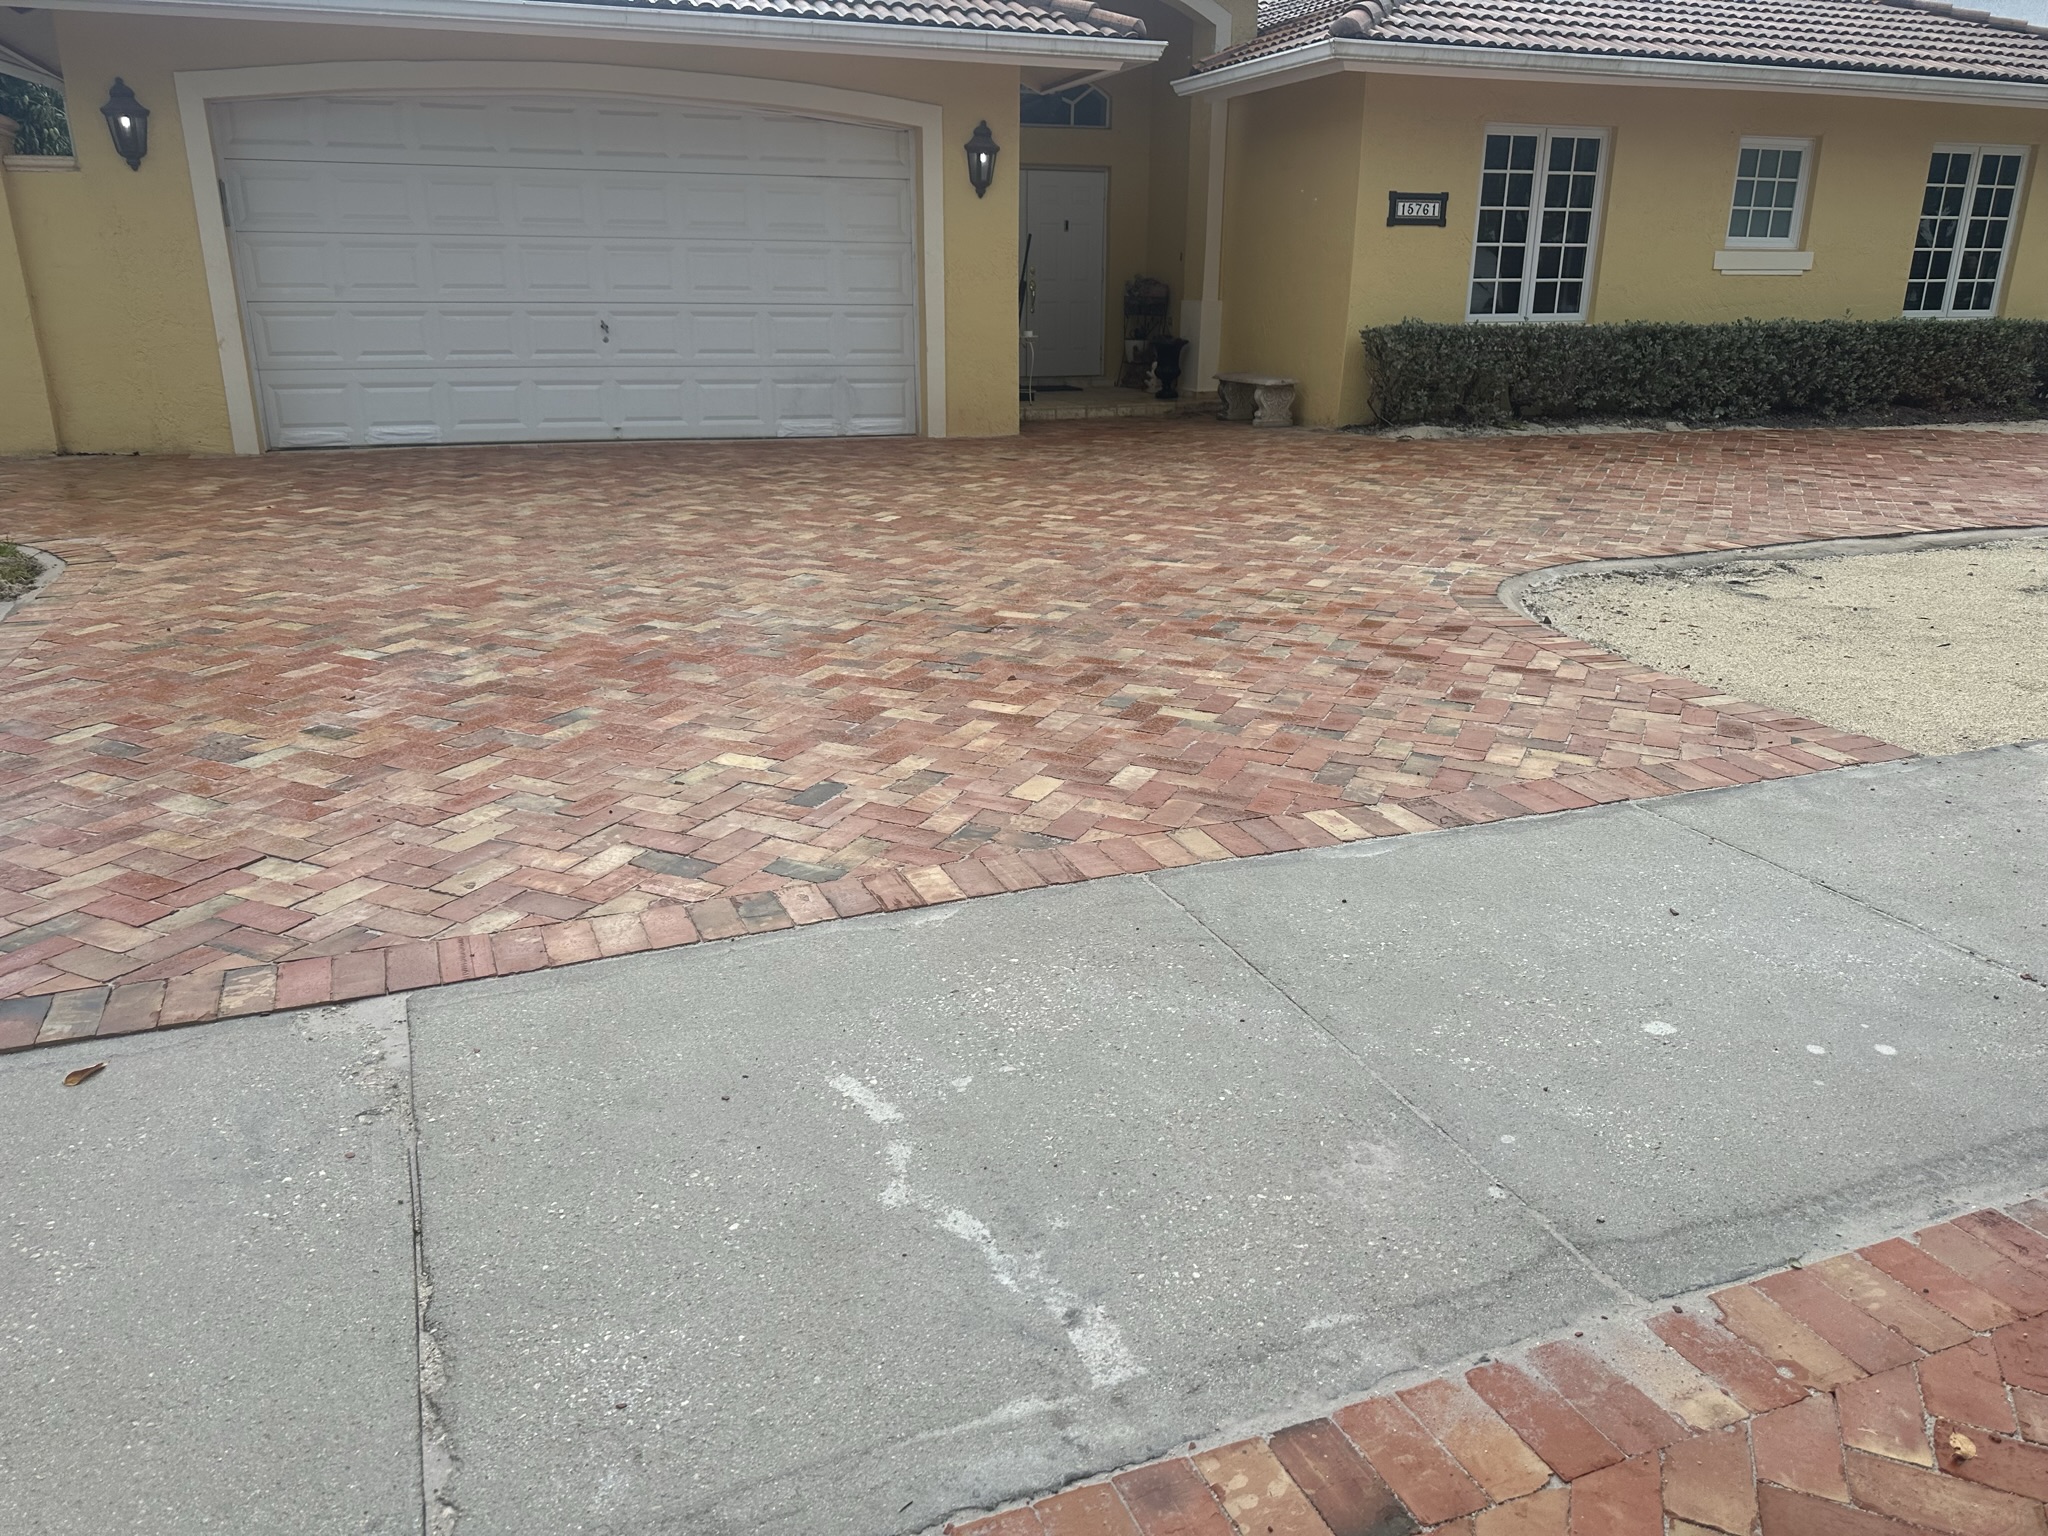 Completed Chicago brick driveway project in a suburban setting.